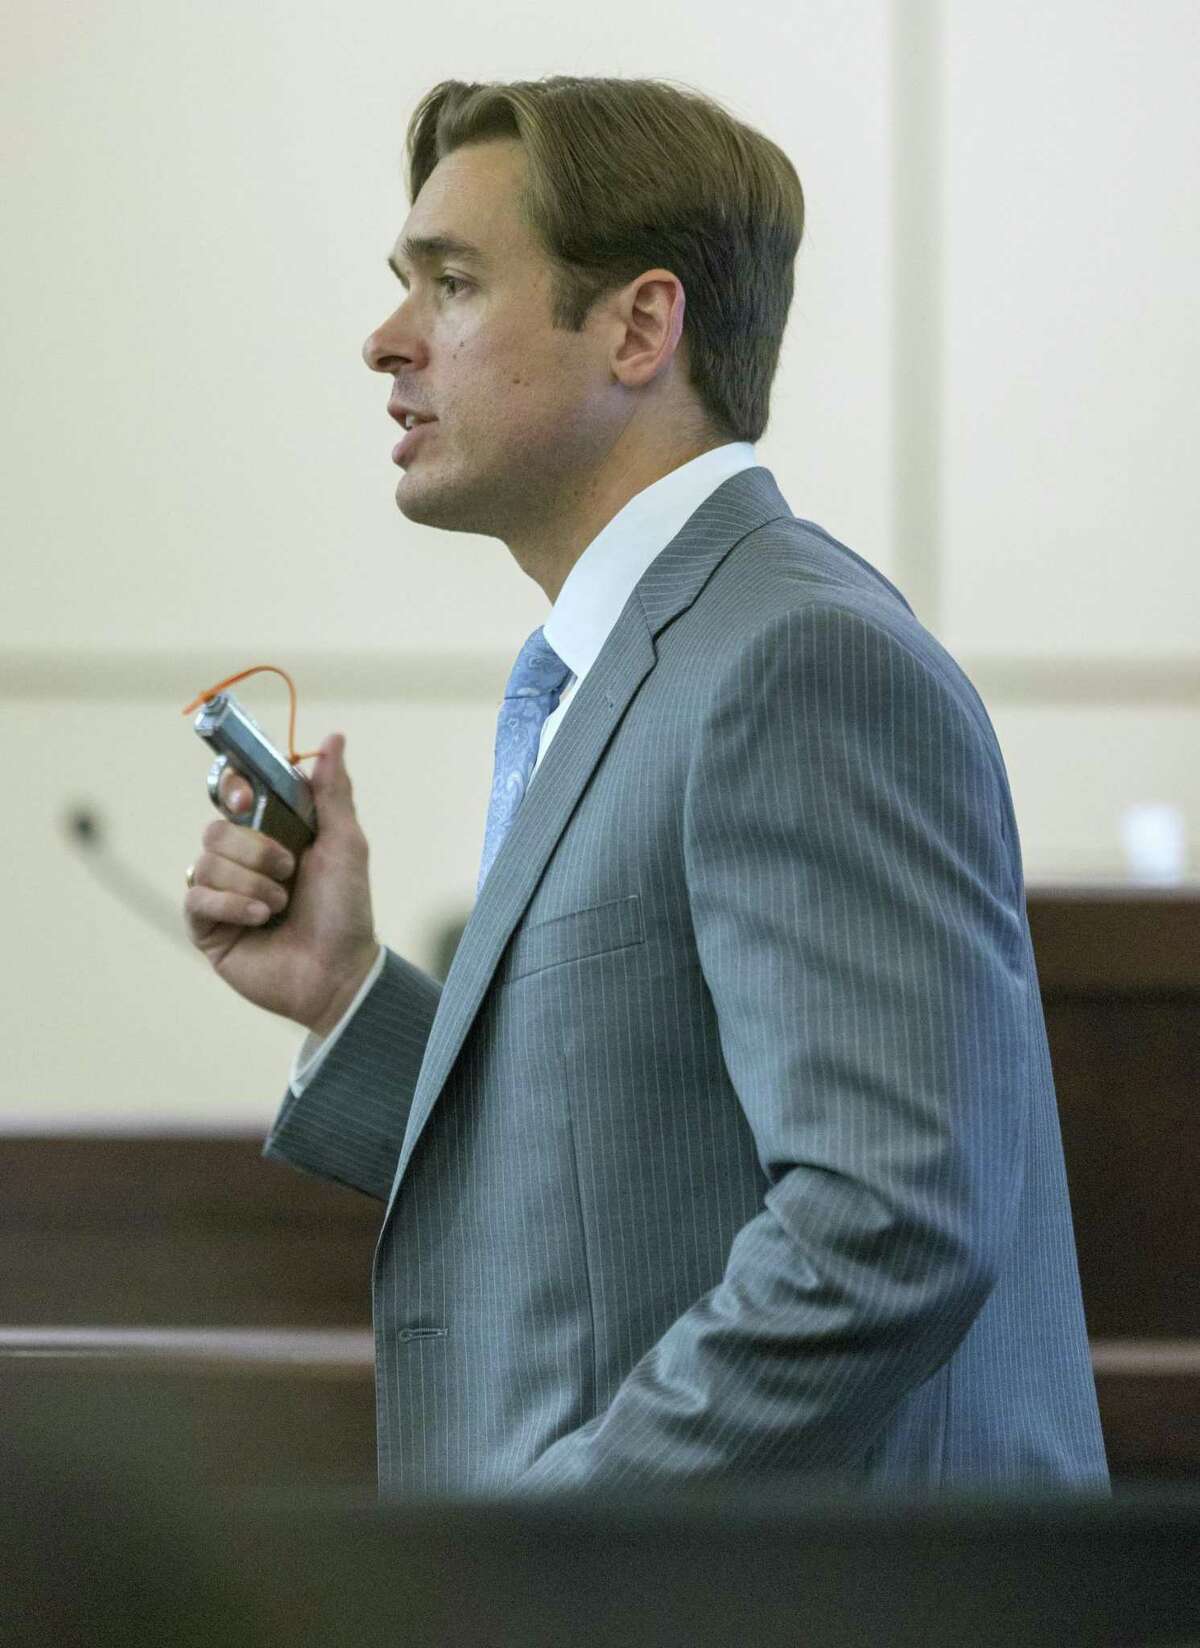 Assistant district attorney Josh Somers holds the .25 caliber pistol Tuesday, Sept. 19, 2017 used to kill Xavier Cordero, Jr. and Steven Rendon as he makes his closing argument in Antoinette Martinez's capital murder trial. The jury found Martinez guilty on both counts of capital murder and she was automatically sentenced to life without parole since the prosecutors did not seek the death penalty.